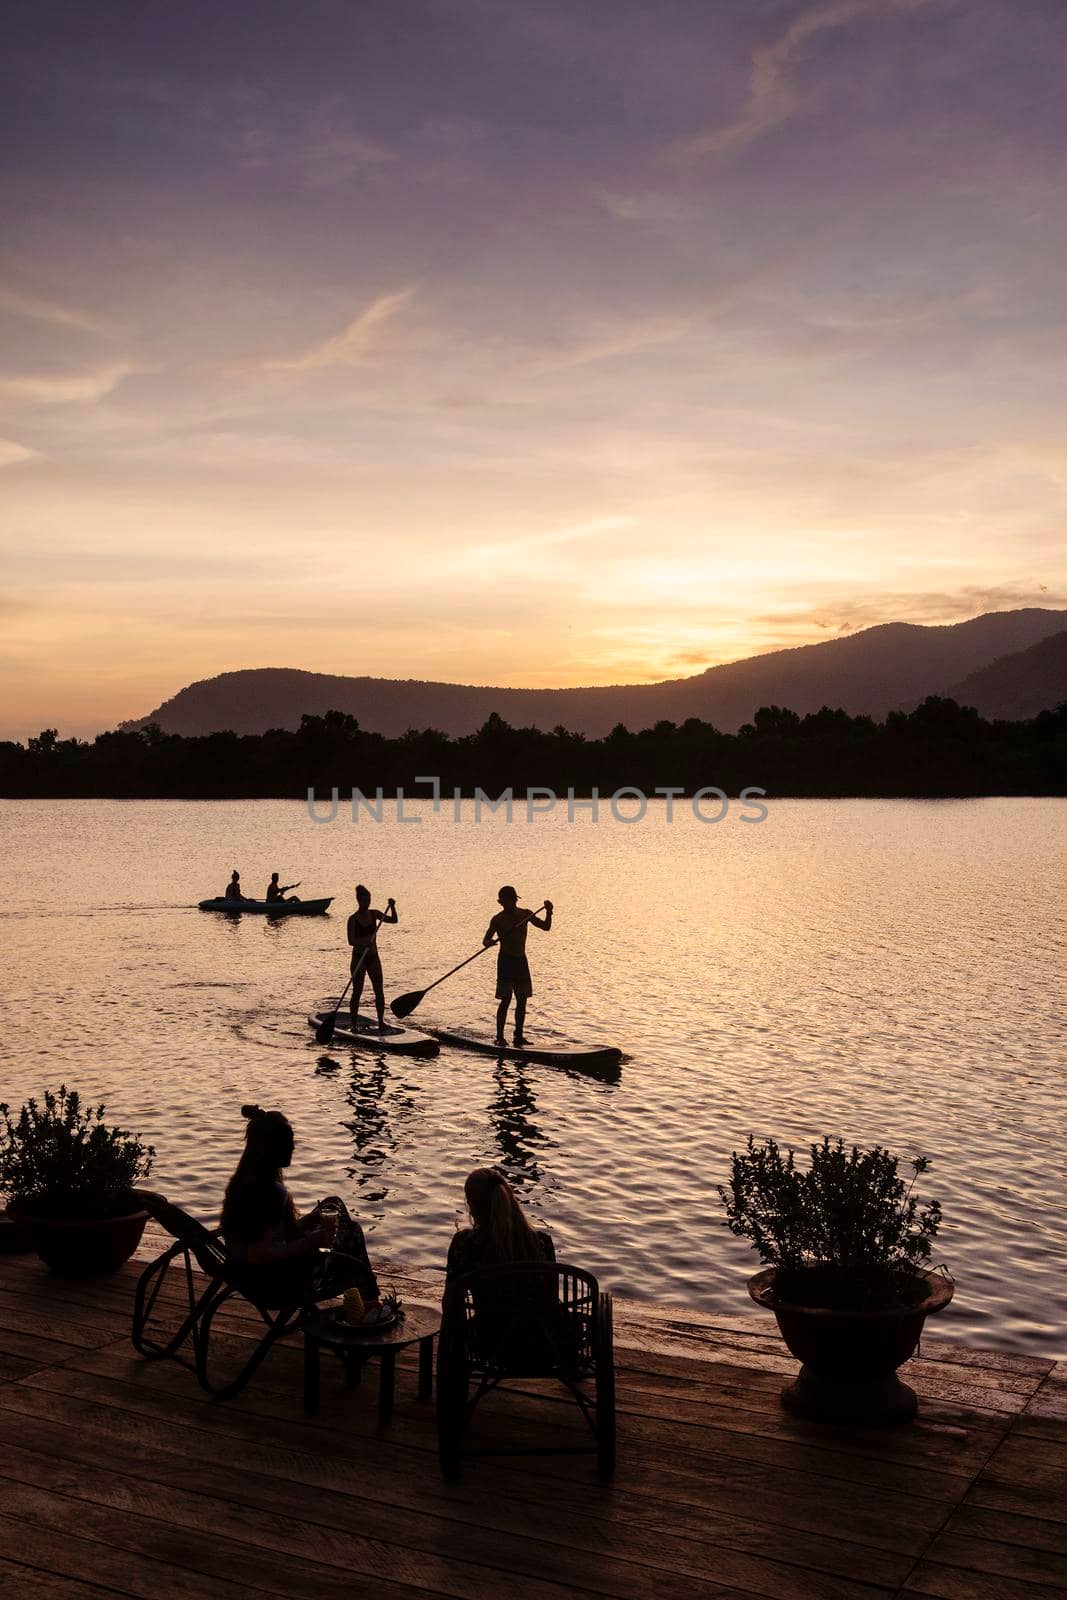 kampot river view cambodia with SUP stand up paddle boarding by jackmalipan